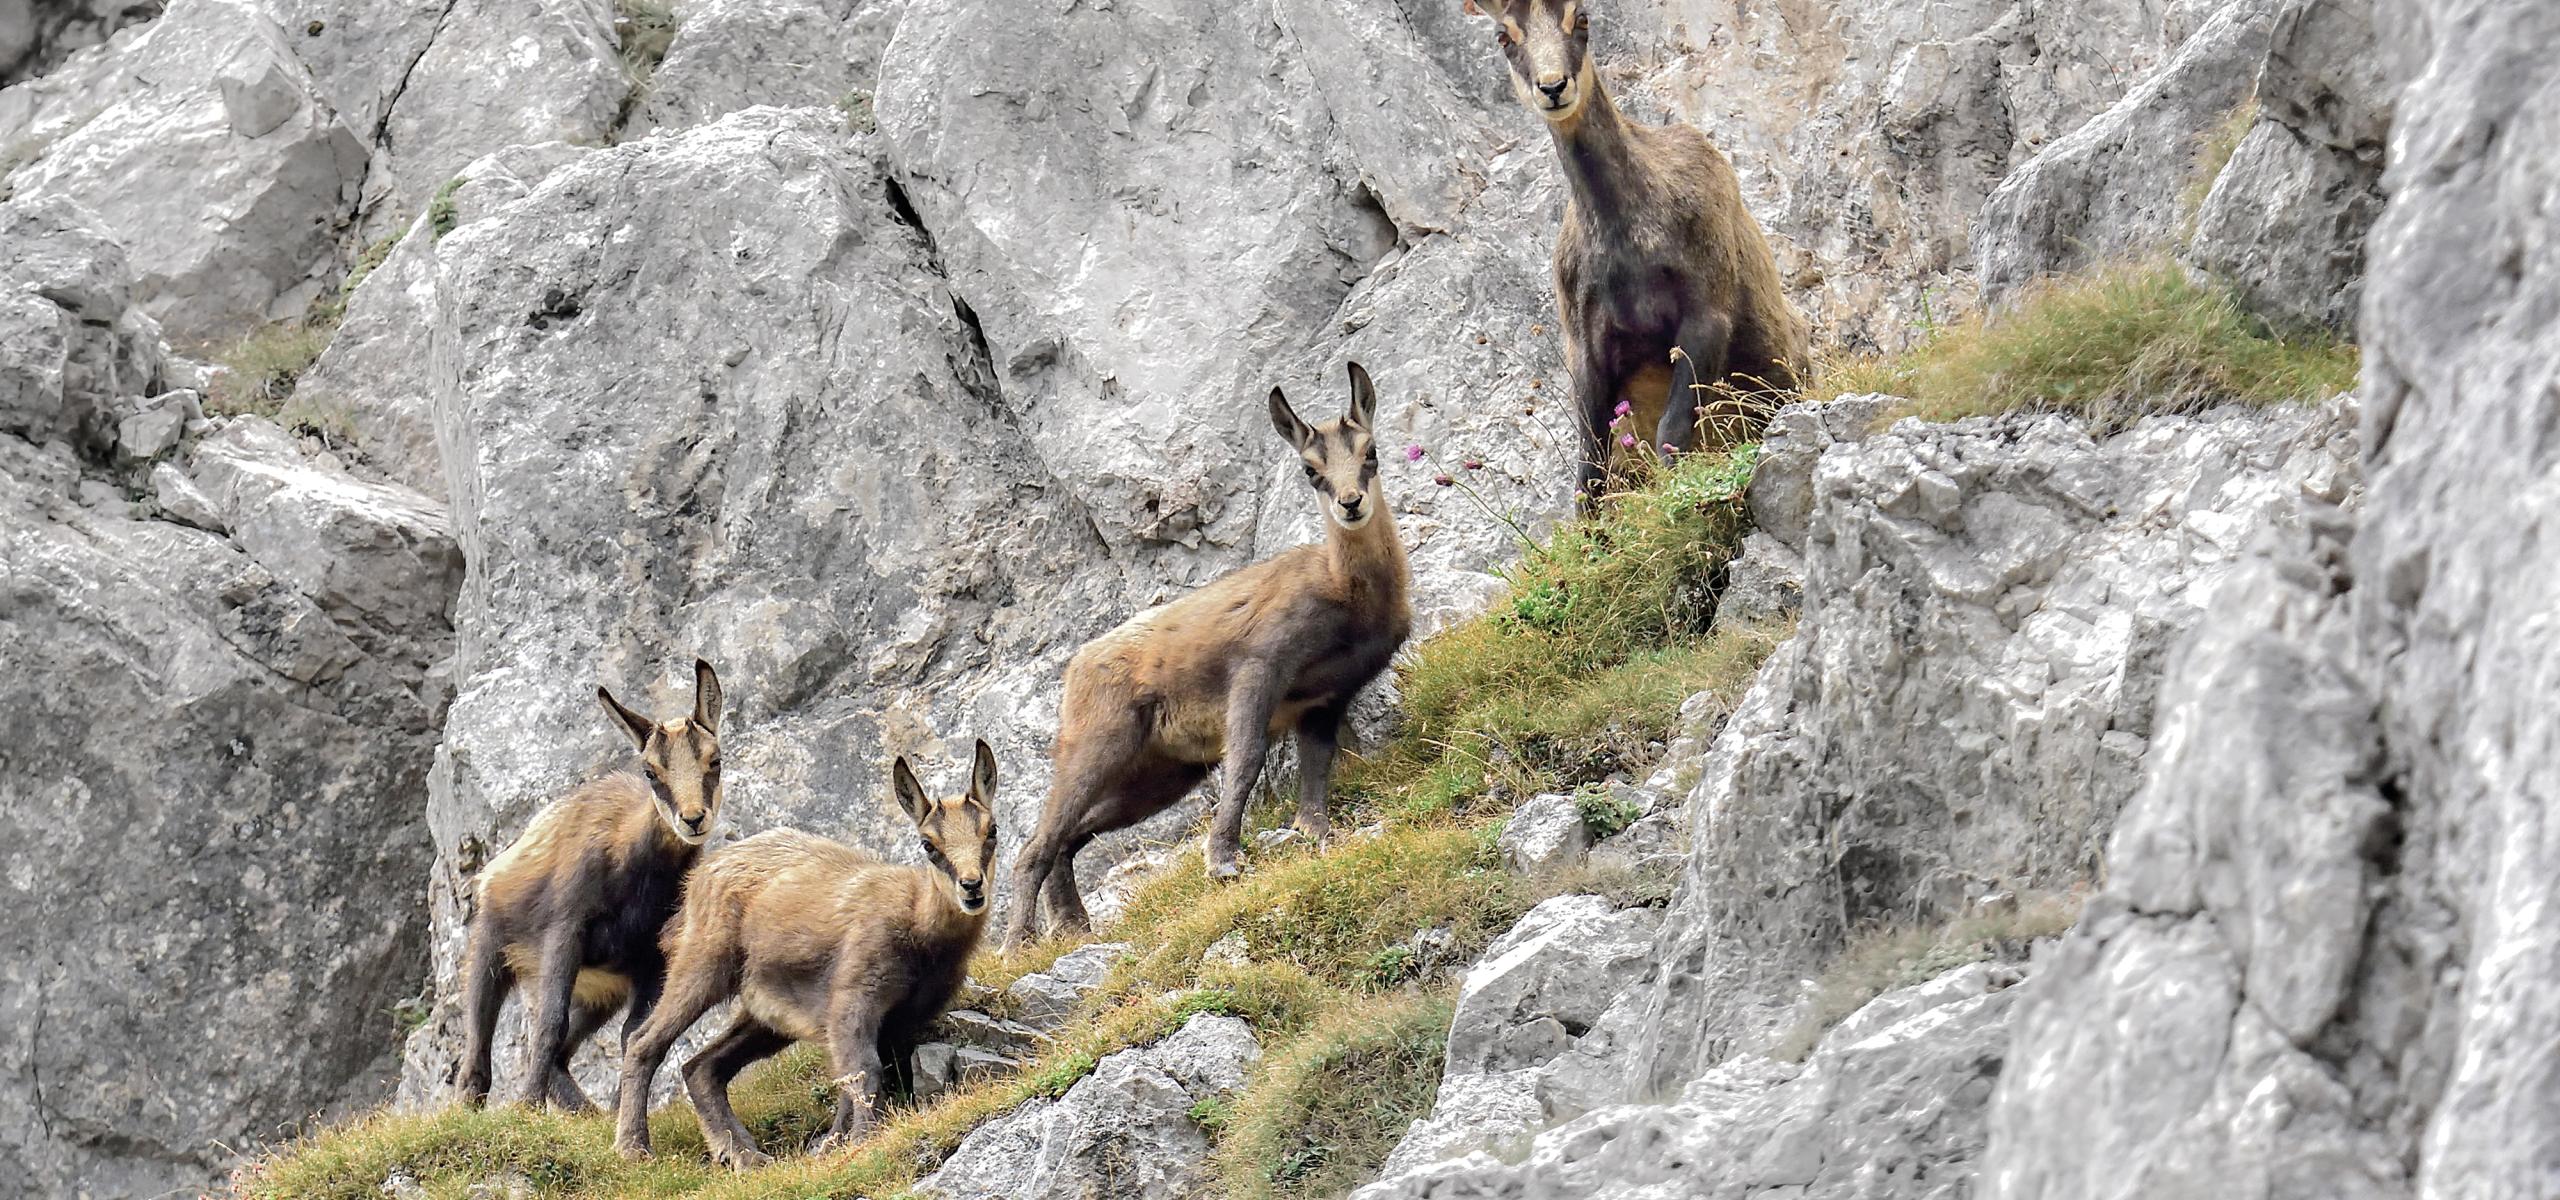 Chamois goat with three young in rocky terrain